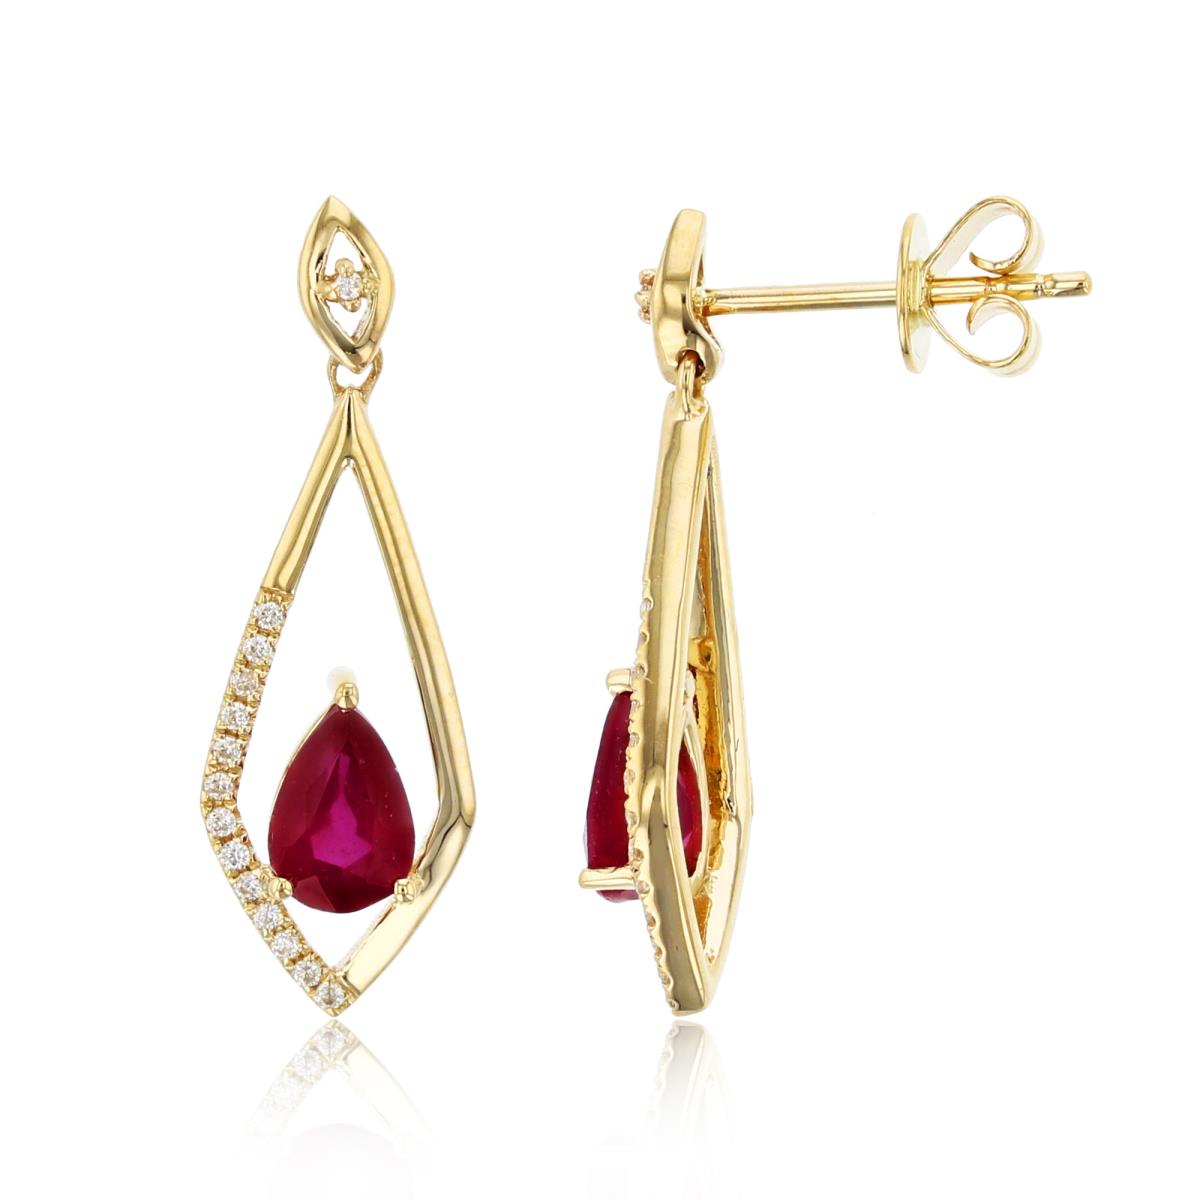 10K Yellow Gold 0.09cttw Diamonds & 6x4mm PS Glassfield Ruby Open Rhombus Dangling Earring with Silicone Back